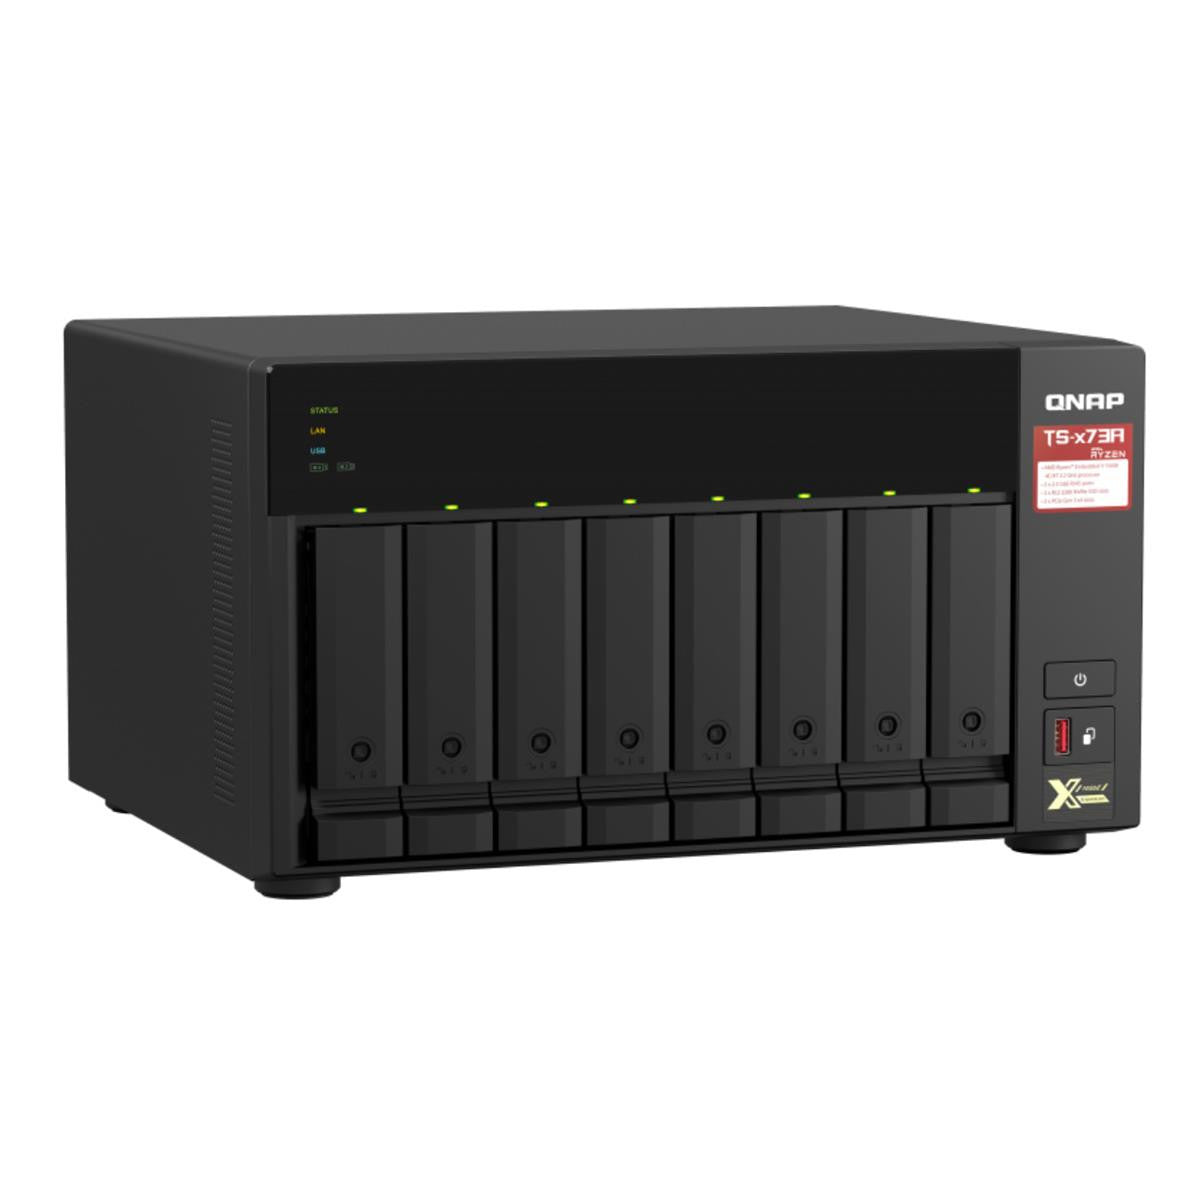 QNAP TS-873A 8-BAY NAS with 64GB DDR4 RAM and 24TB (8x3TB) Western Digital RED PLUS Drives Fully Assembled and Tested